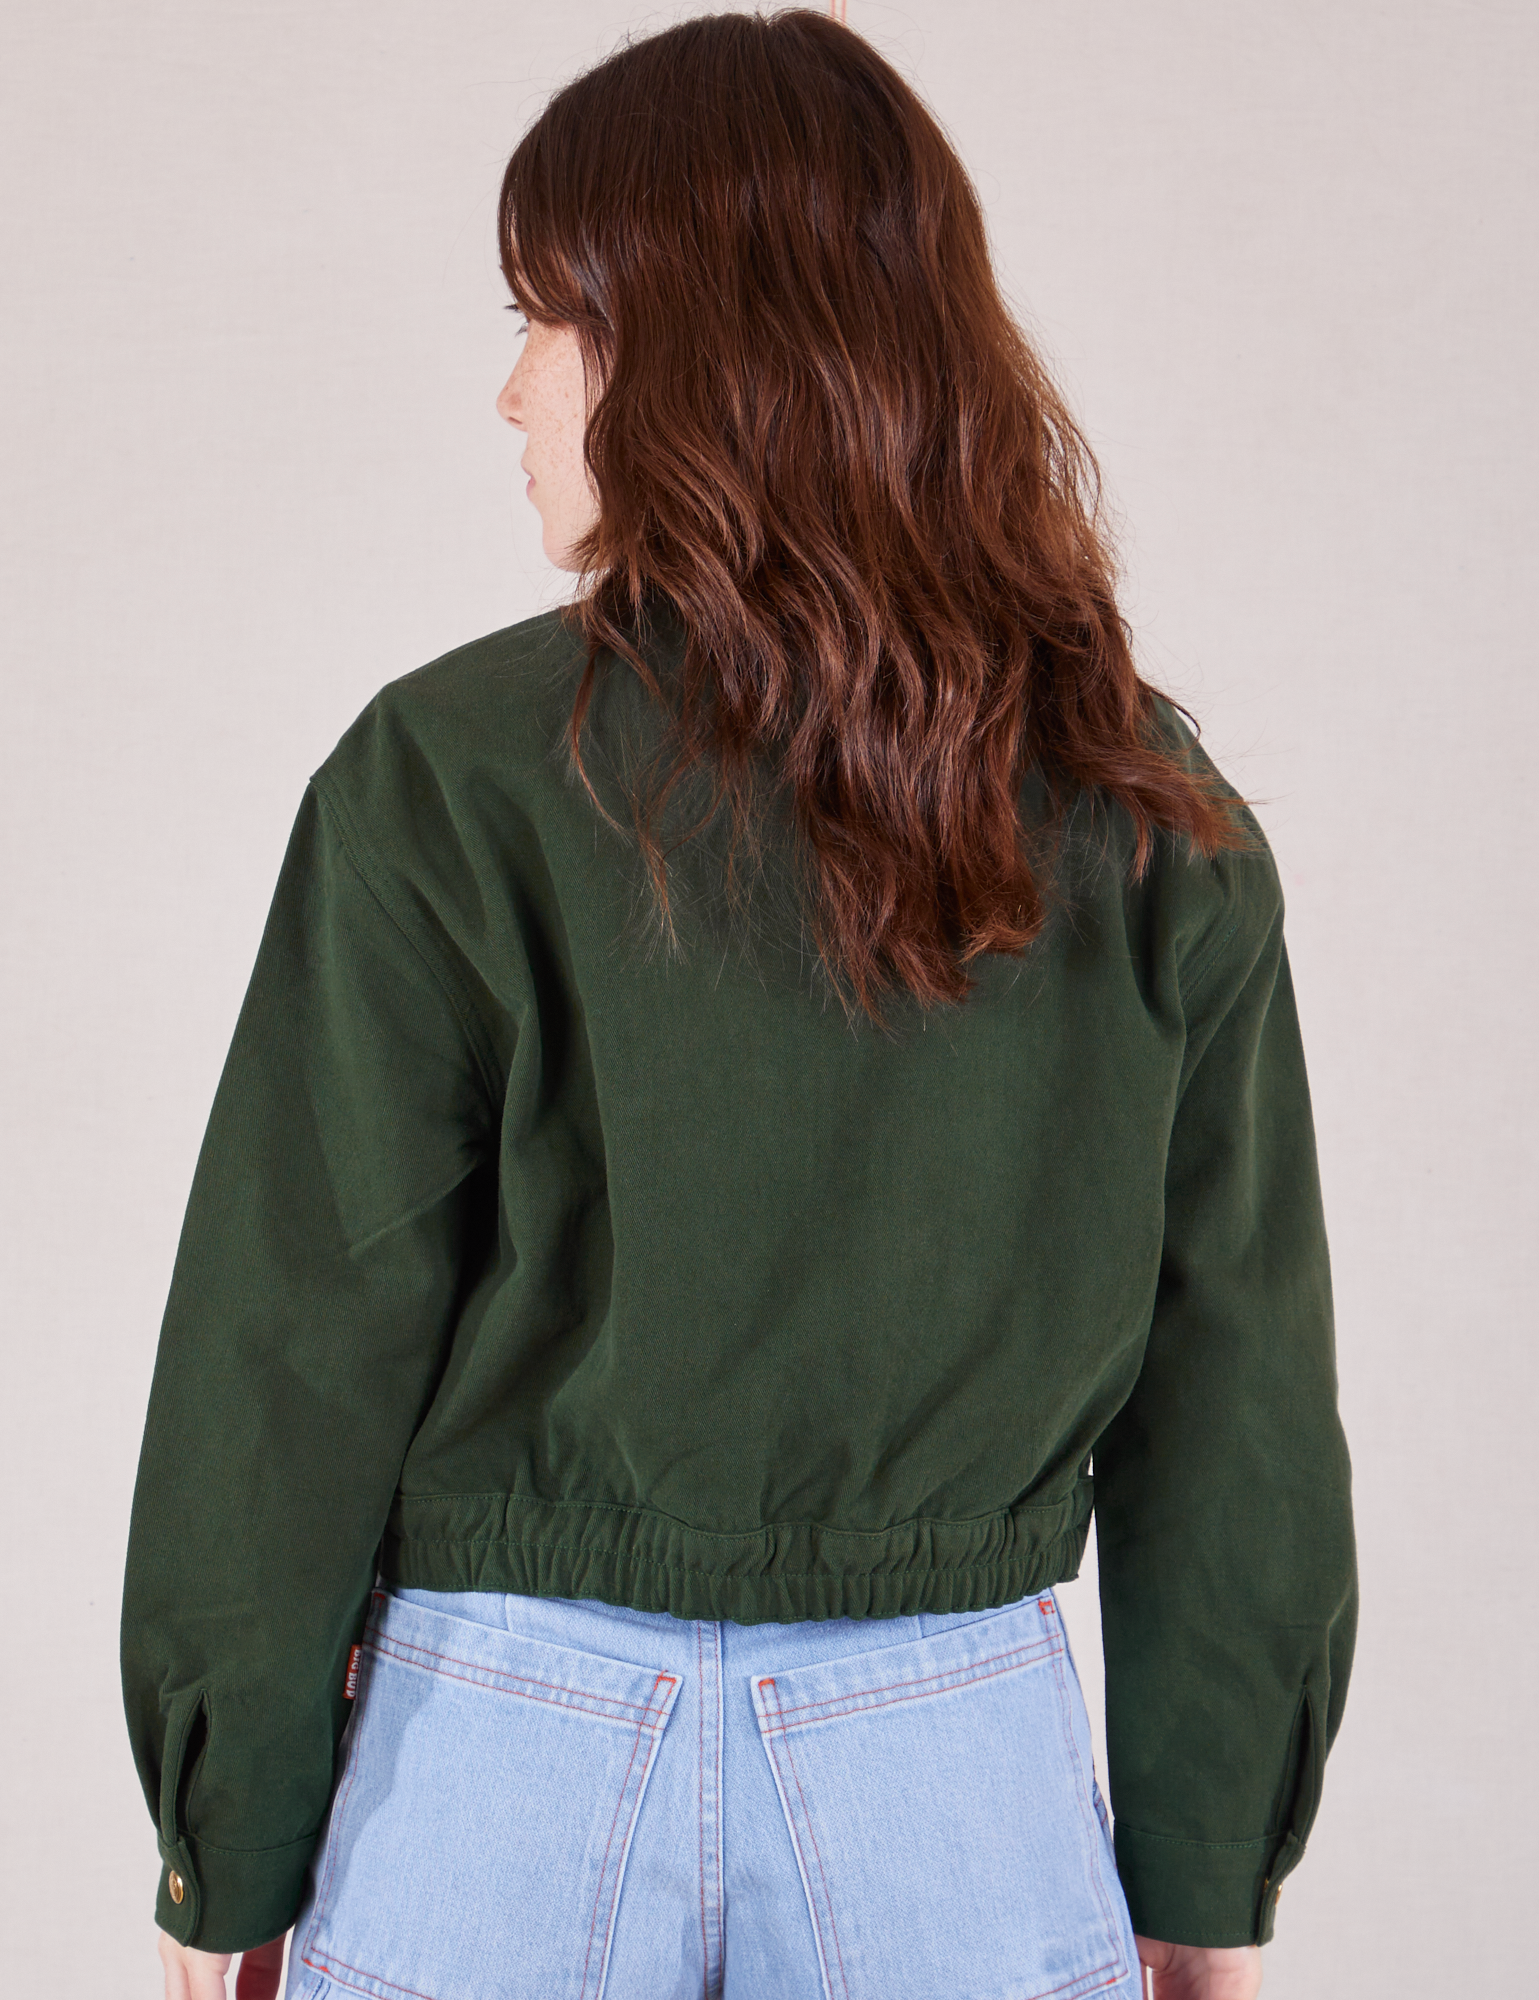 Ricky Jacket in Swamp Green back view on Hana